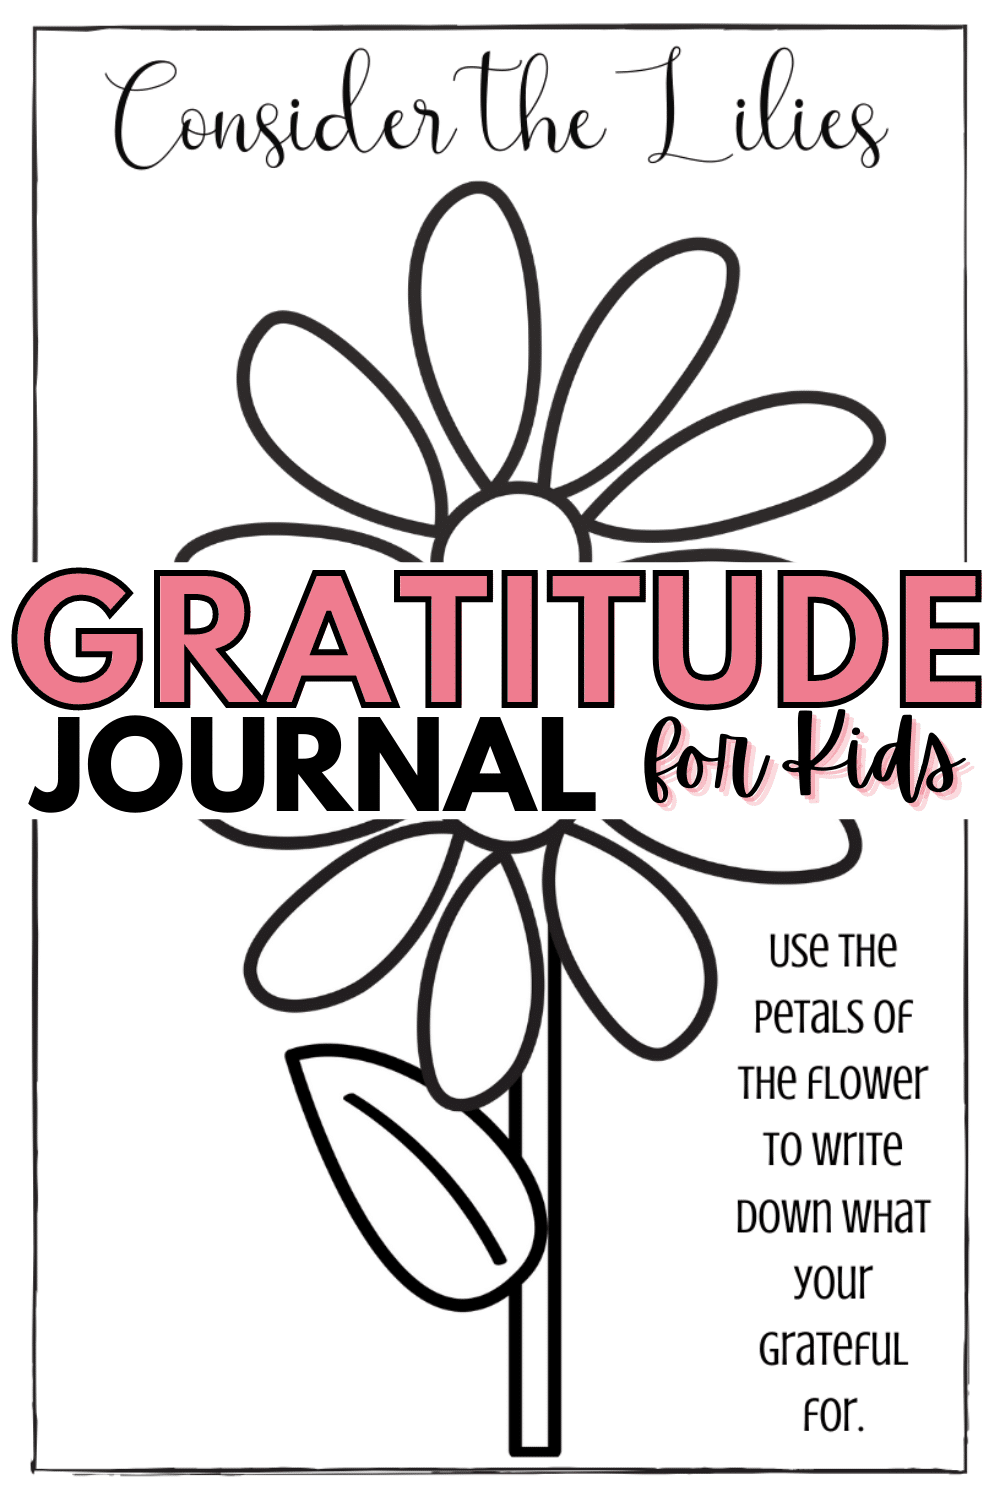 This Gratitude Journal for Kids is perfect for remembering what to be thankful for! This printable journal is great for all ages! #freeprintable #journal #forkids #gratitudejournal #thankful via @wondermomwannab